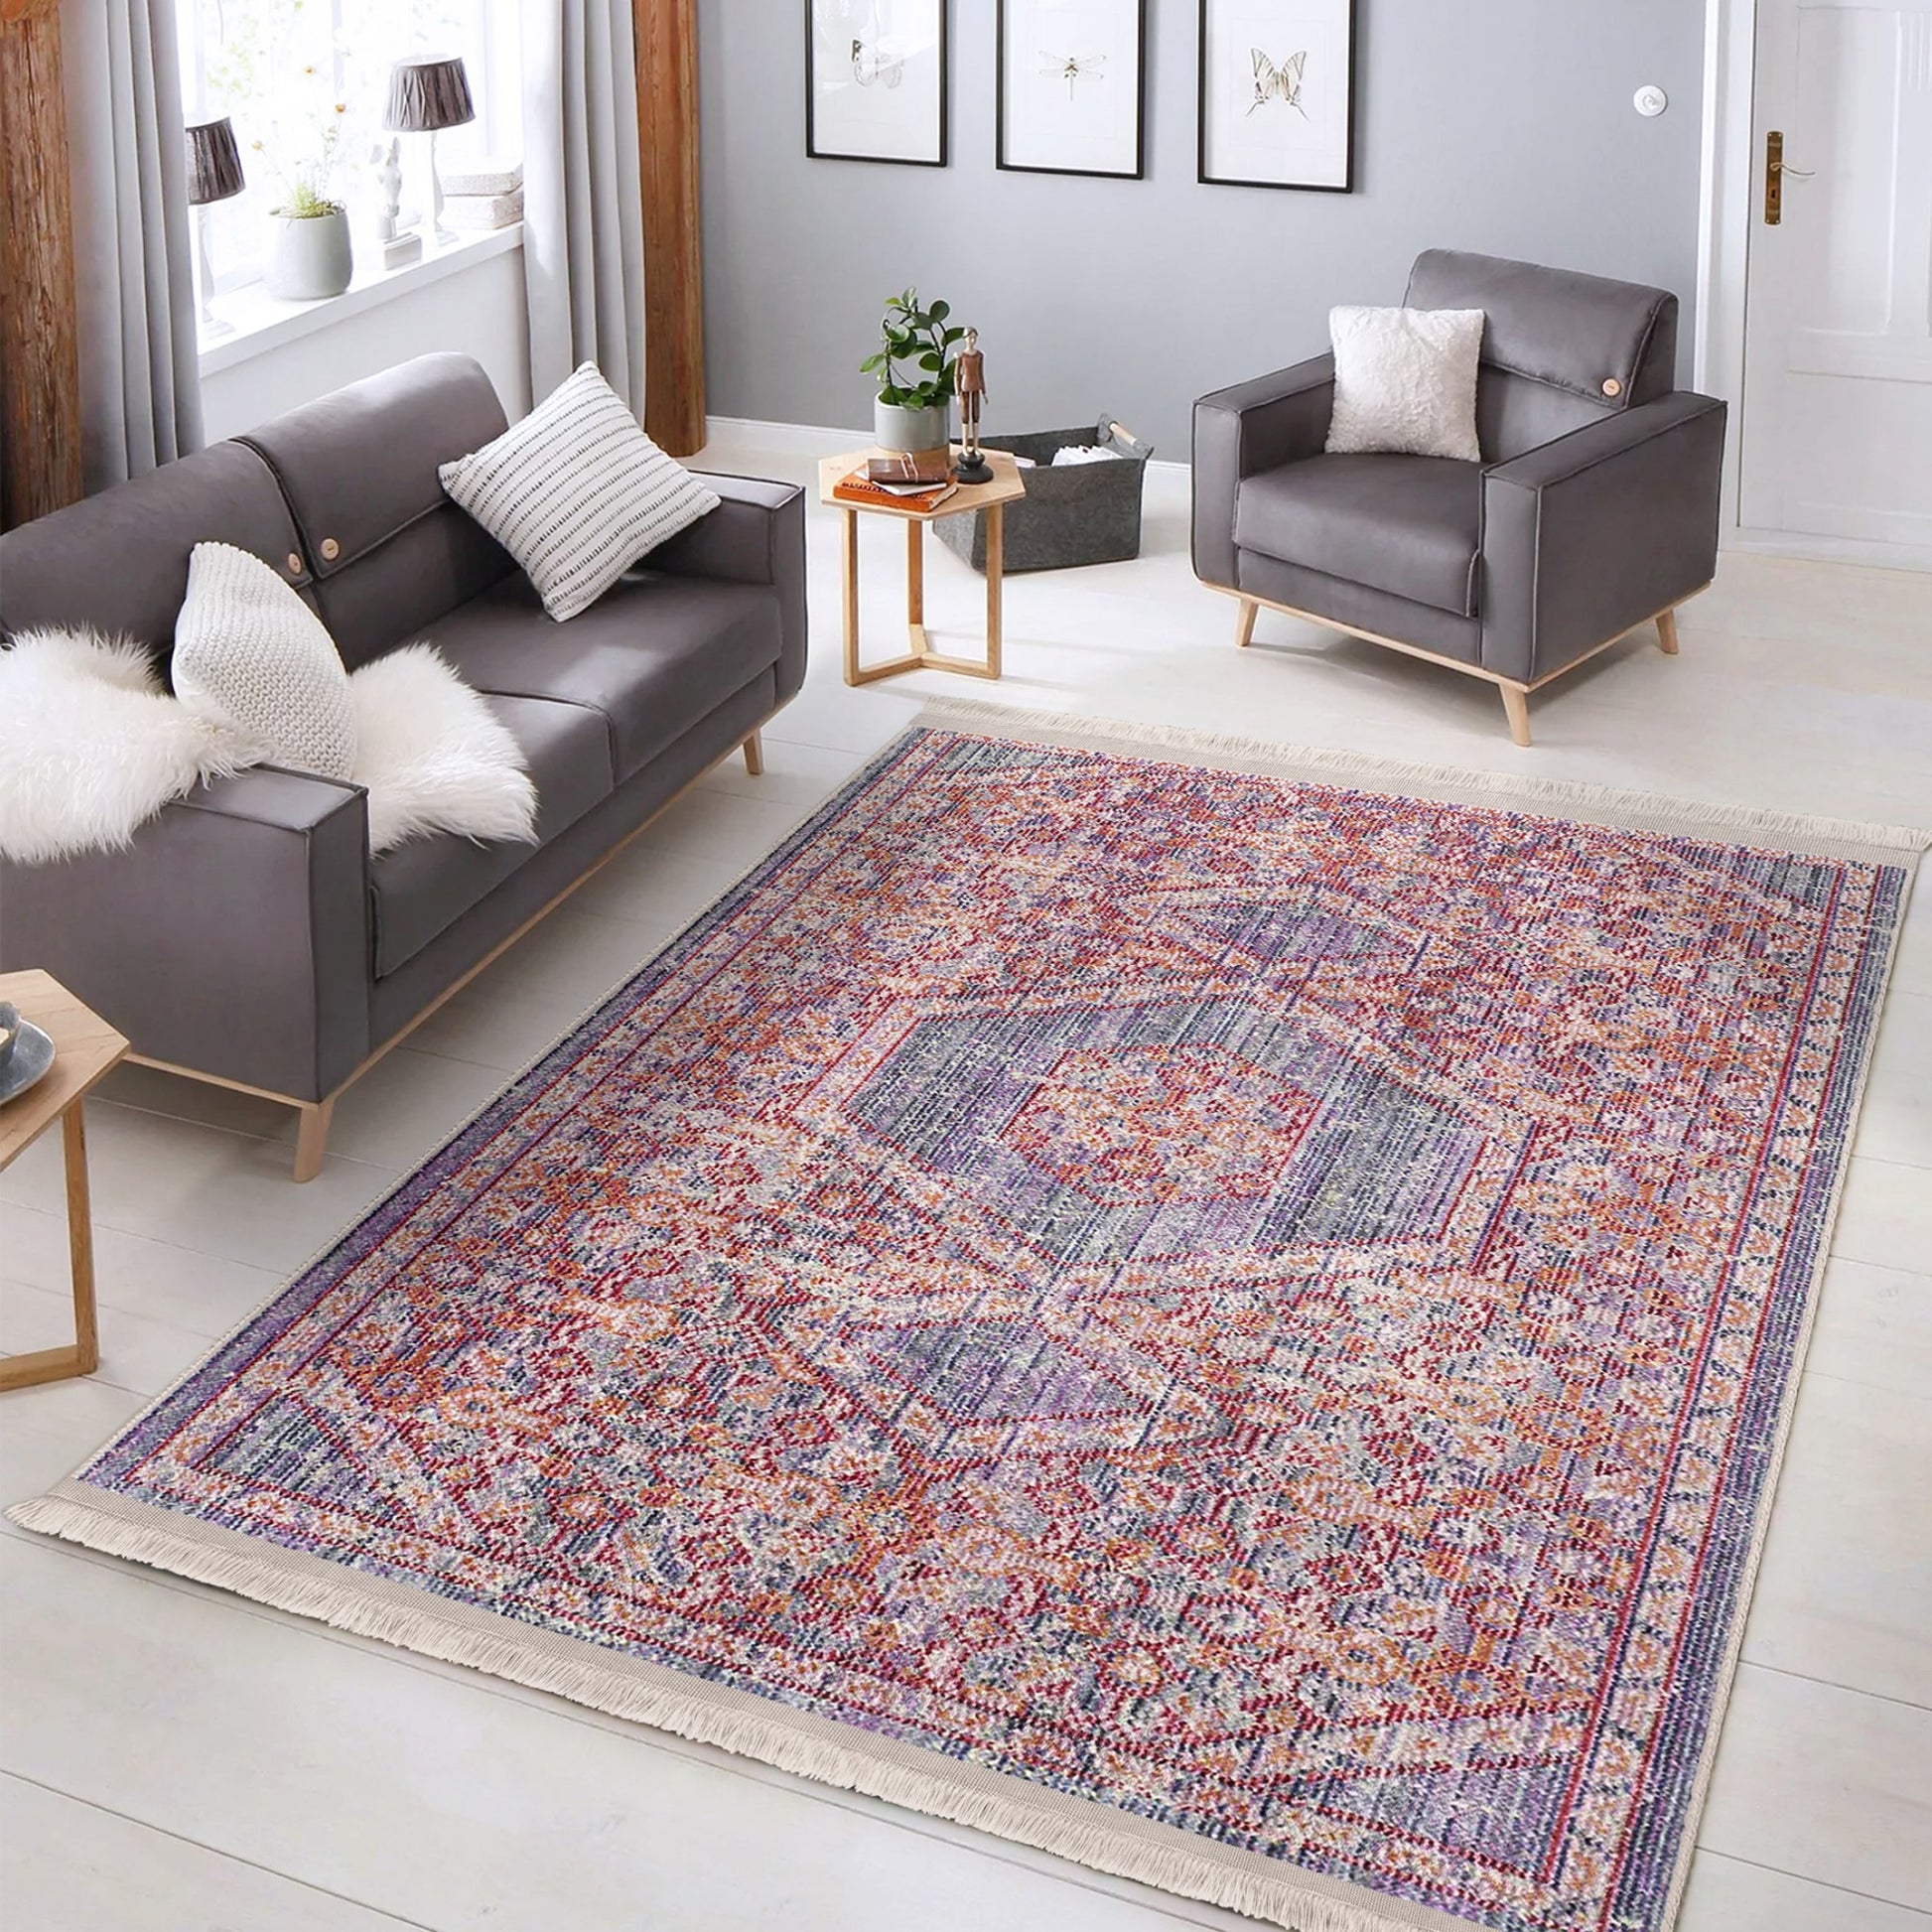 High-Quality Persian Area Rug for Classic Decor